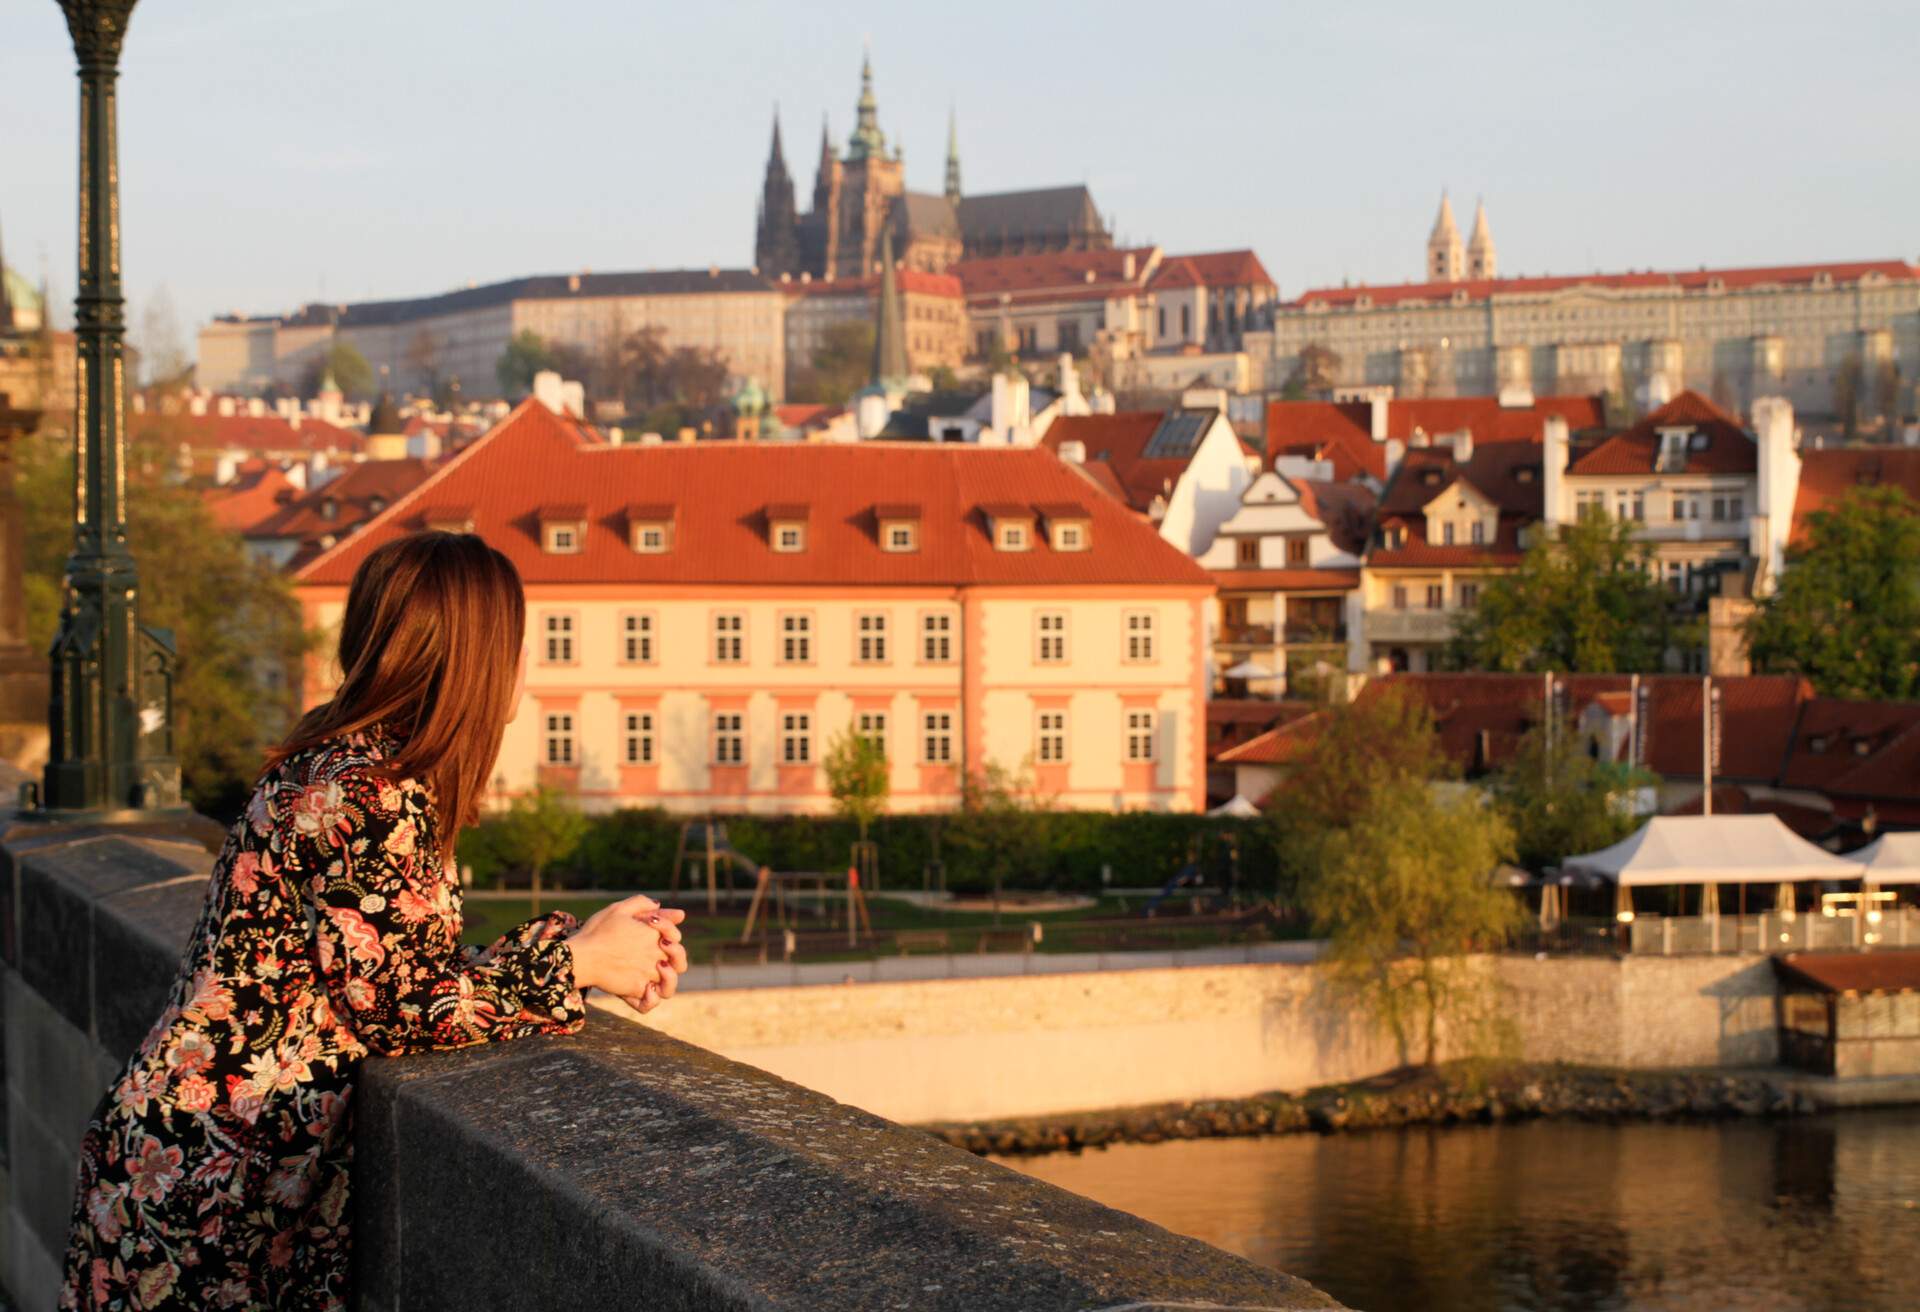 A woman leaning on a bridge wall, her gaze fixed on the stunning architecture.